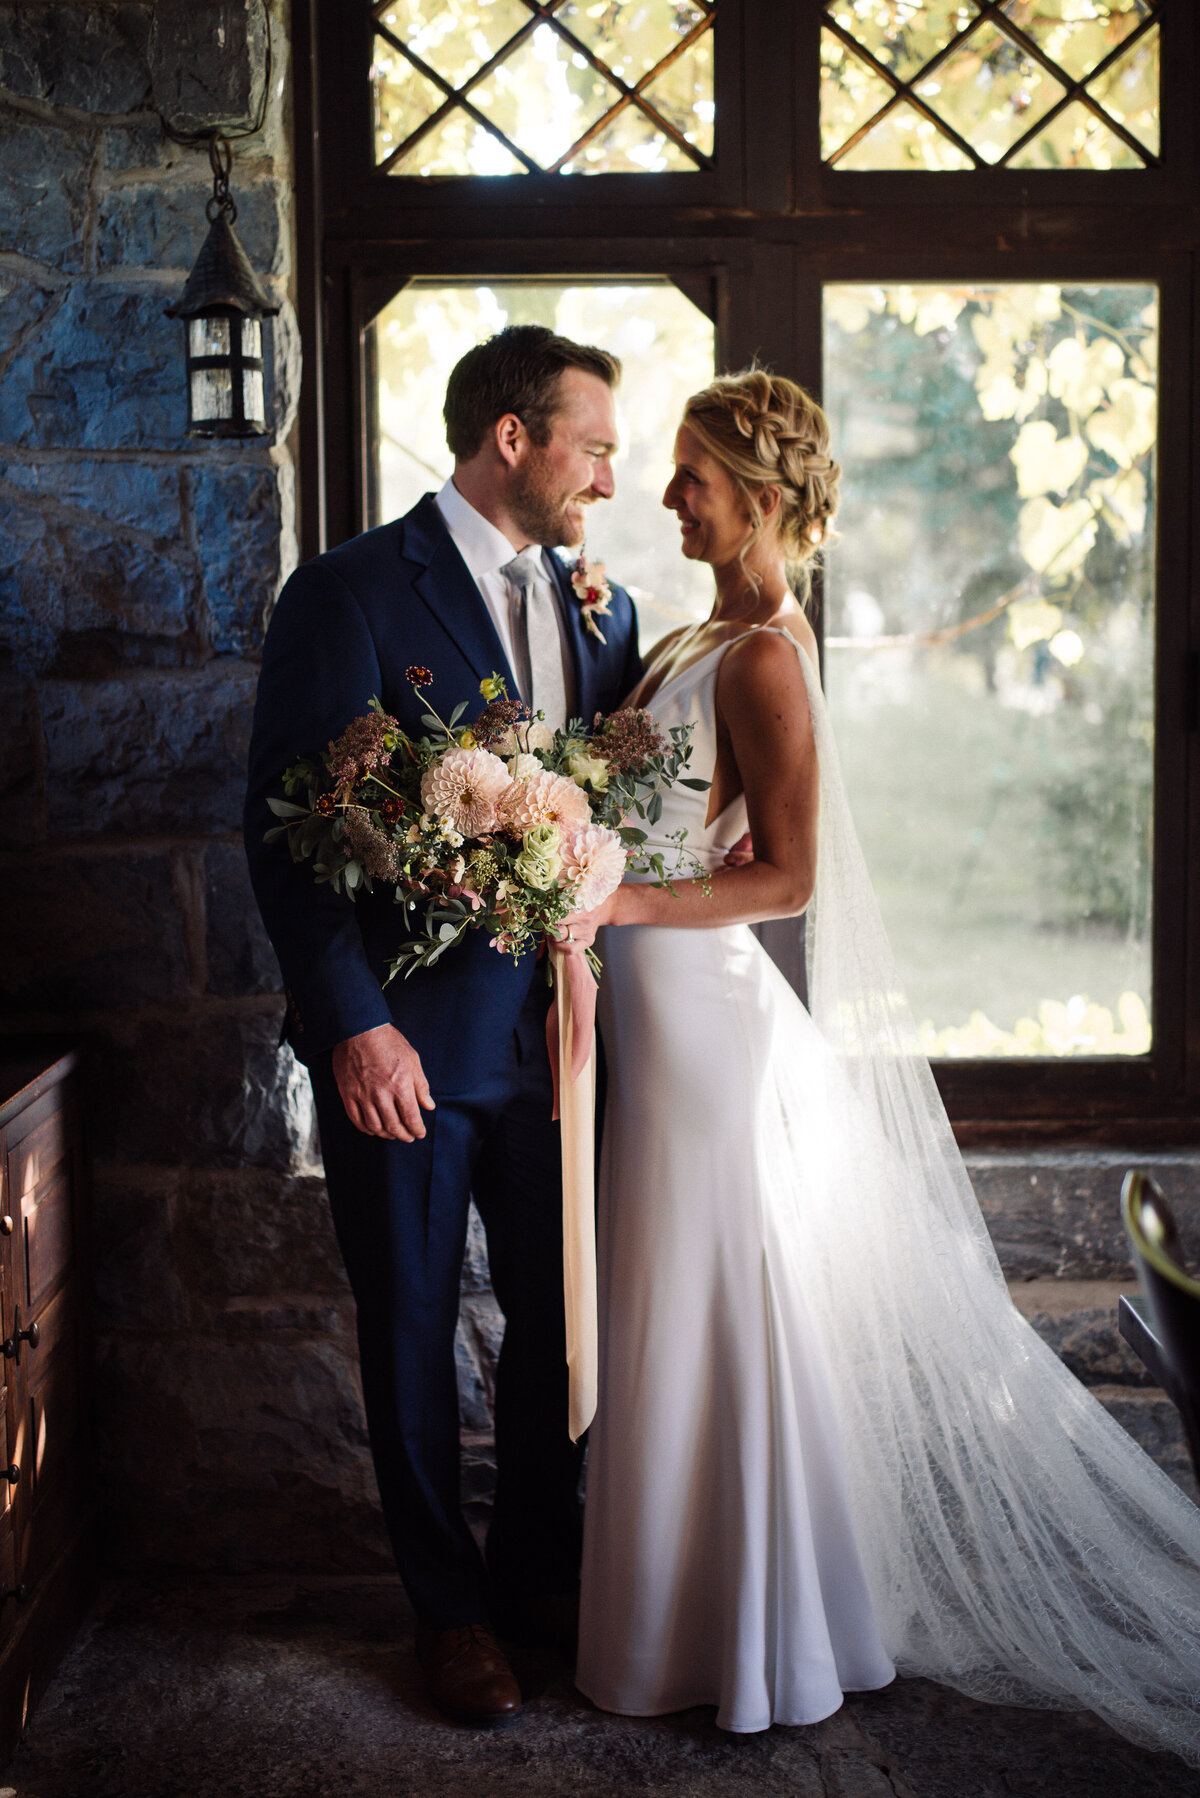 Bride wearing Alyssa Kristin bridal with cape from Everthine bridal.